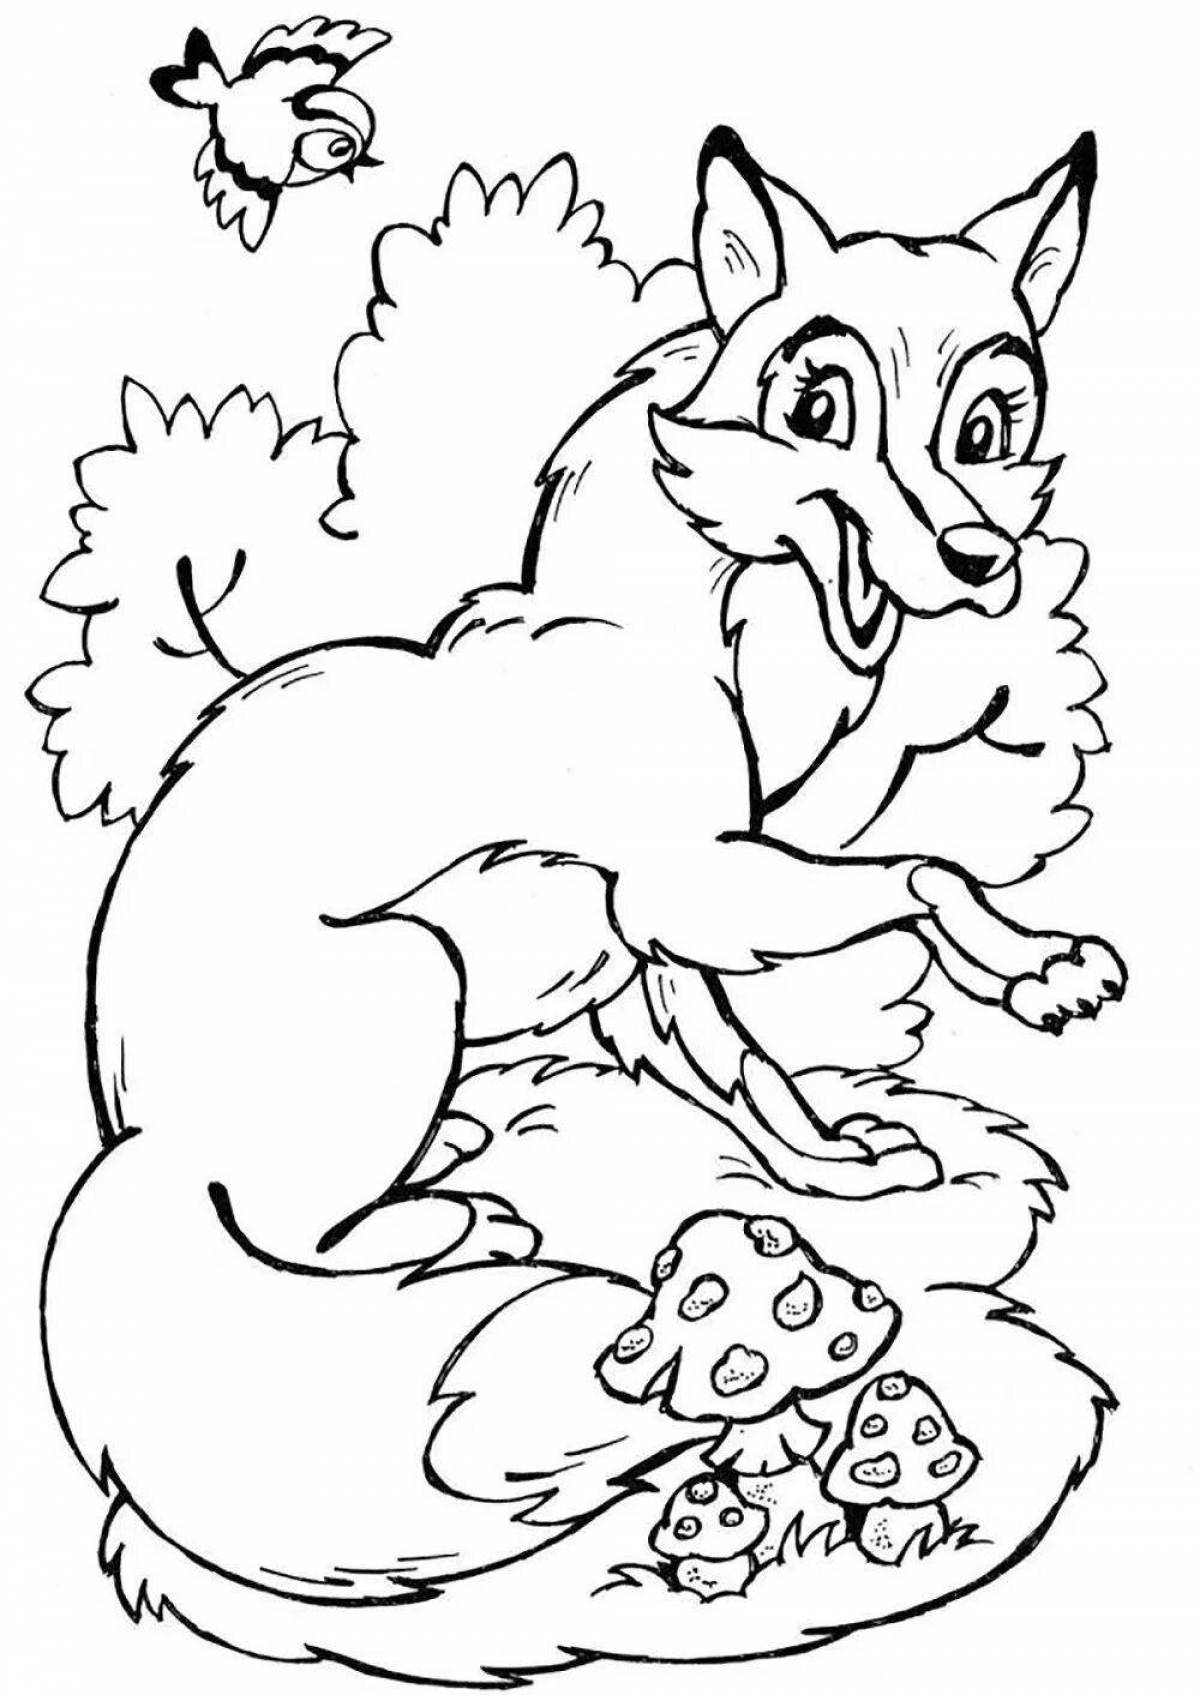 Colorful sly fox coloring page